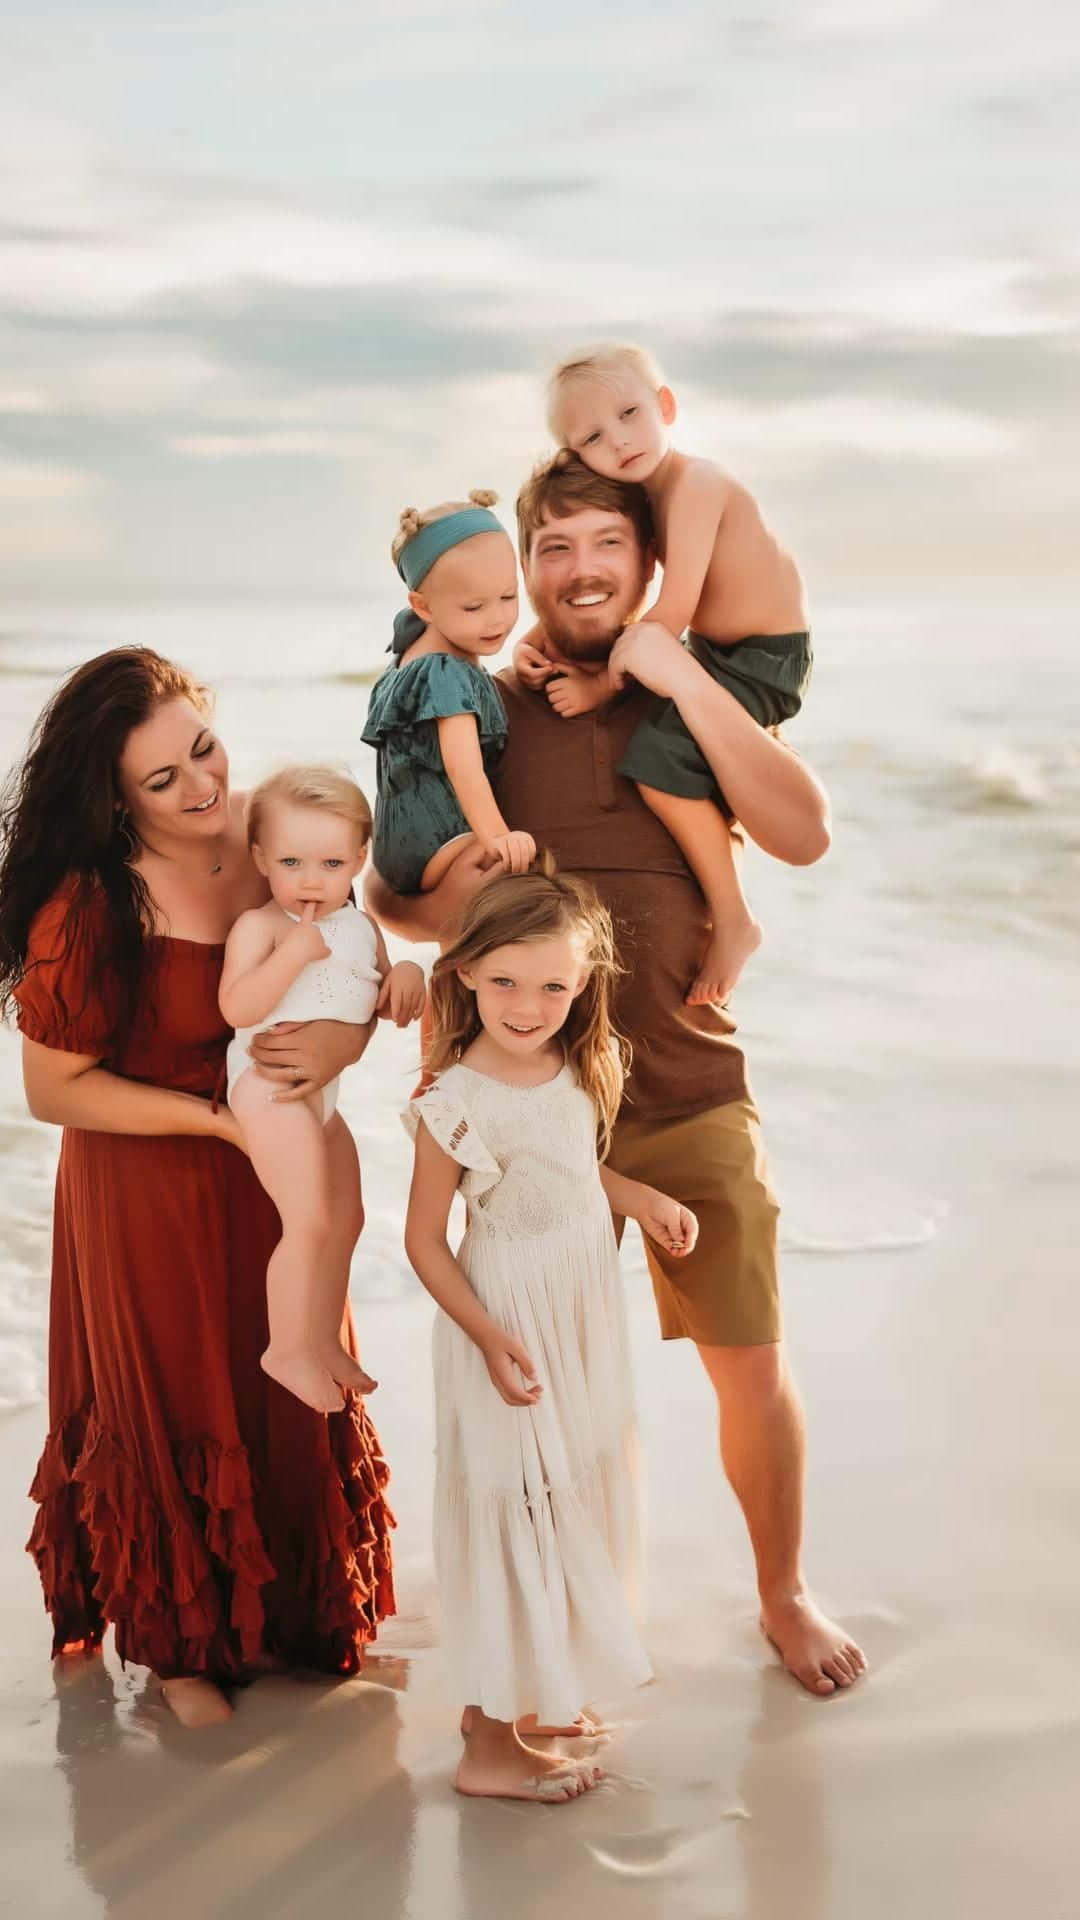 Family Beach [picture] 1080 x 1920 Picture